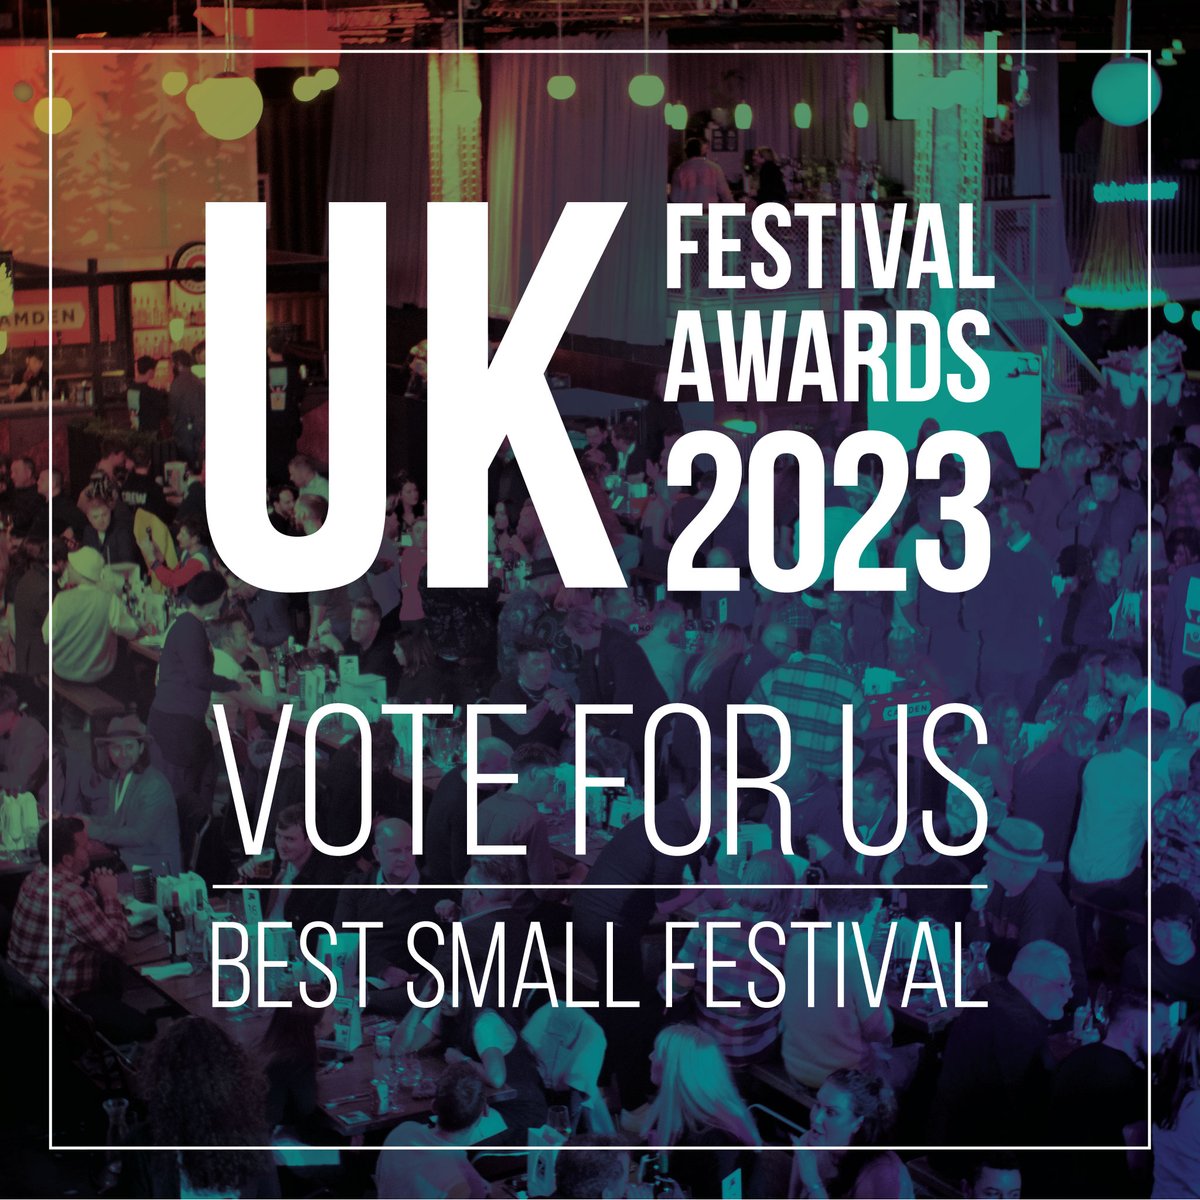 VOTING NOW OPEN FOR THE UK FESTIVAL AWARDS! 🙌

We're in 4 categories: Best Small Festival, Best
Metropolitan Festival, Best Grassroots Festival and
Best Family-Friendly Festival, all voted for by the
public.

We'd love your support, vote now at surveymonkey.co.uk/r/57CZDT5 

#UKFA23